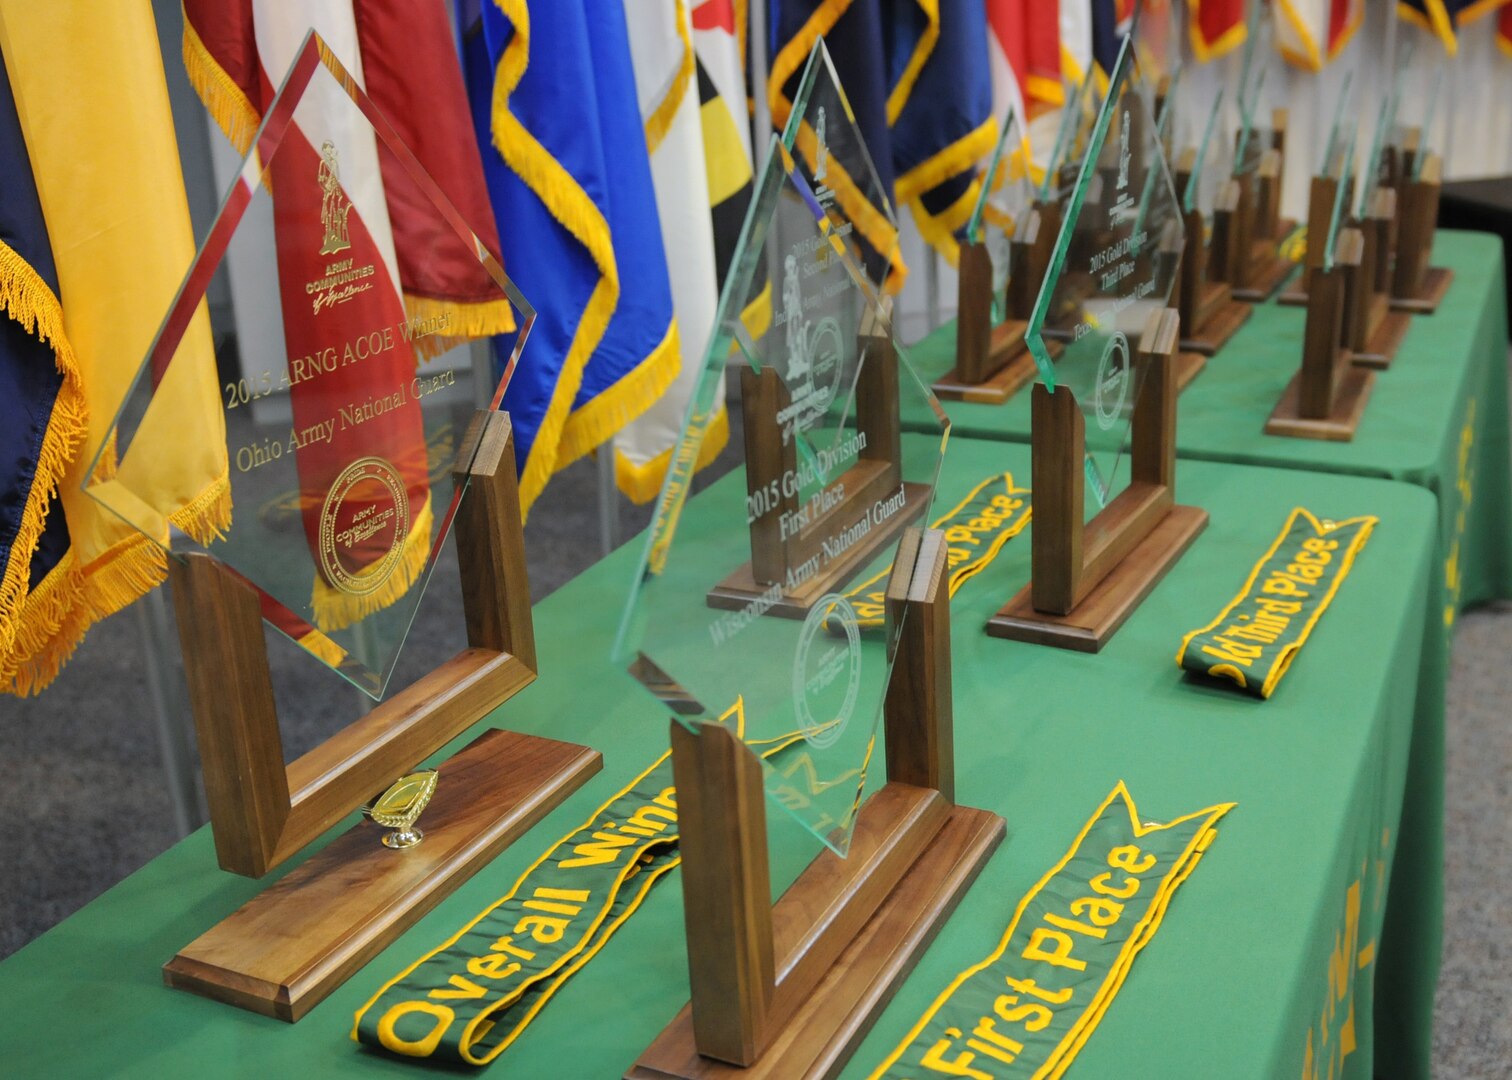 The Army National Guard recognizes Communities of Excellence at an award ceremony held at the Army National Guard Readiness Center in Arlington, Va., April 29, 2015. The annual ceremony recognizes states and installations that have improved efficiency and service across the organization.